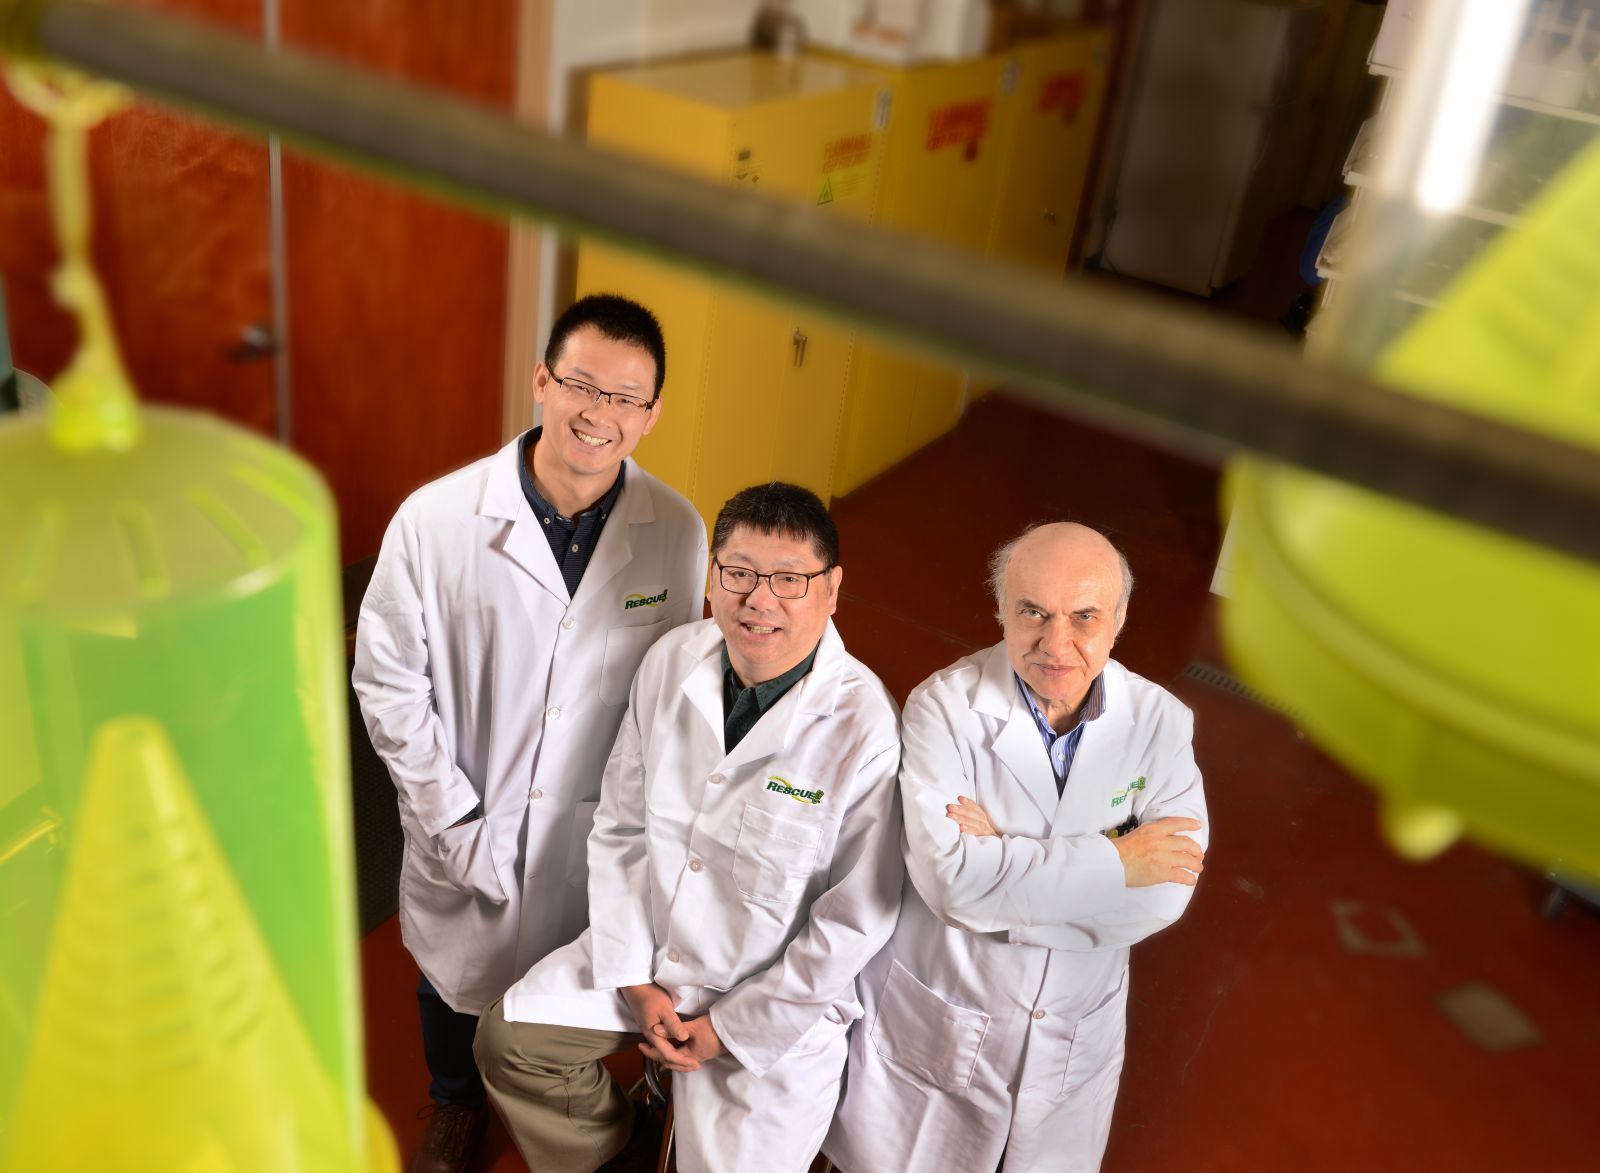 The PhD scientists at RESCUE! who create smarter pest control